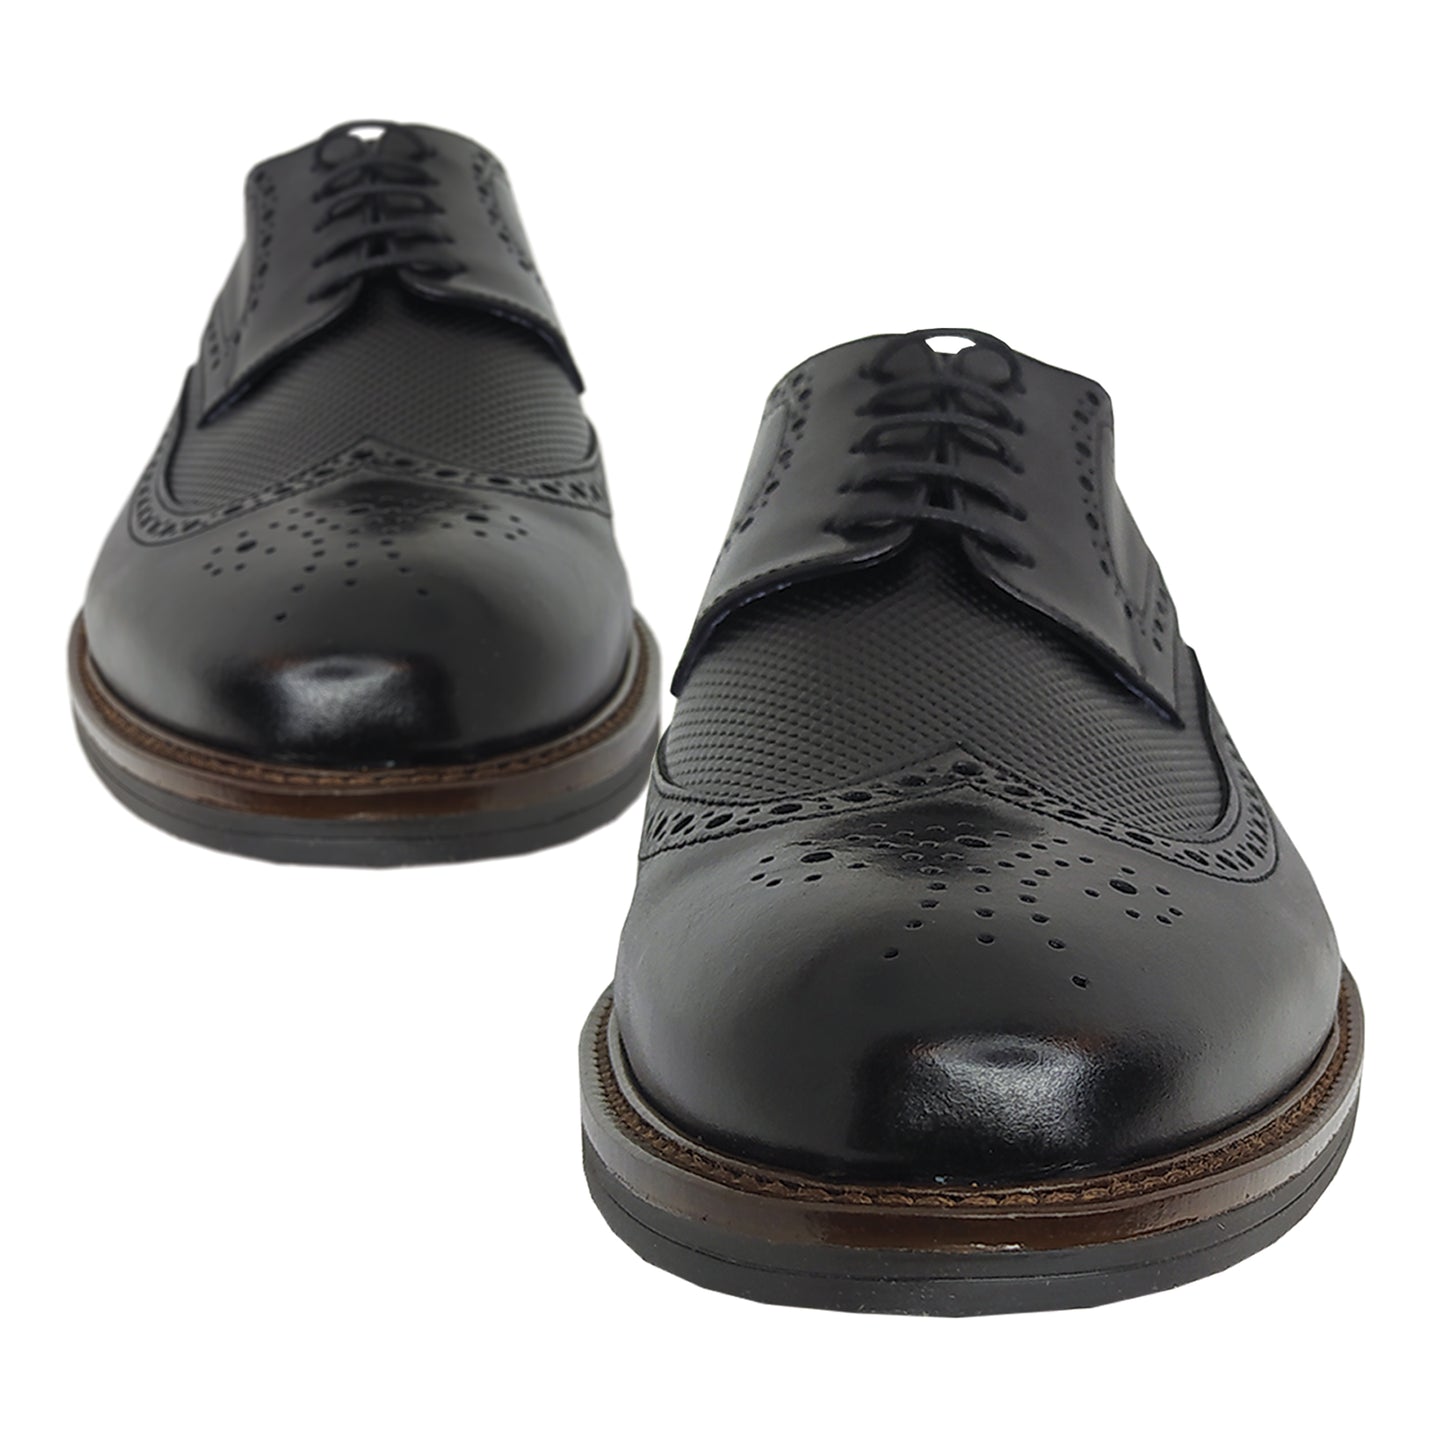 Handmade Leather Lace Up Shoes Black 622 BLACK